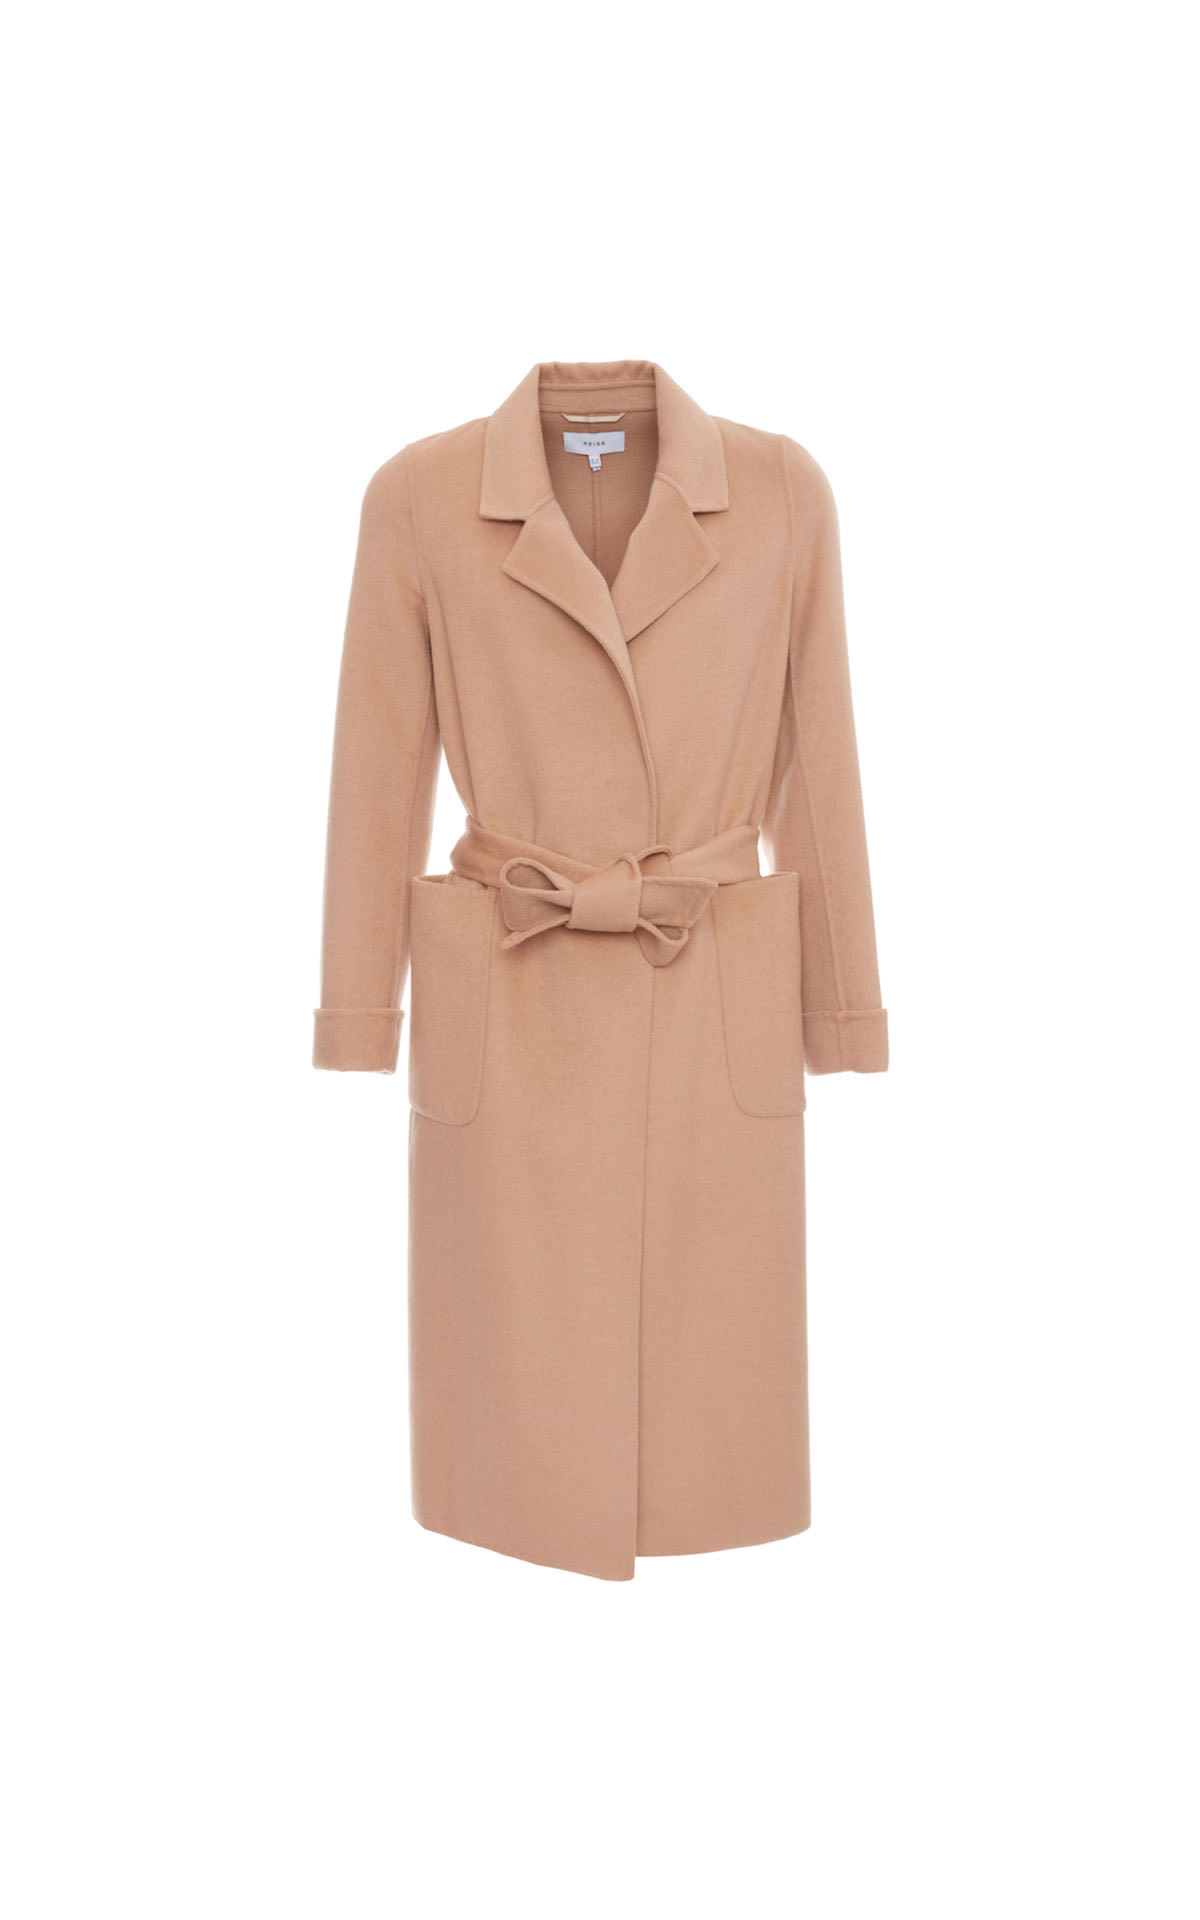 Reiss  Elise coat from Bicester Village